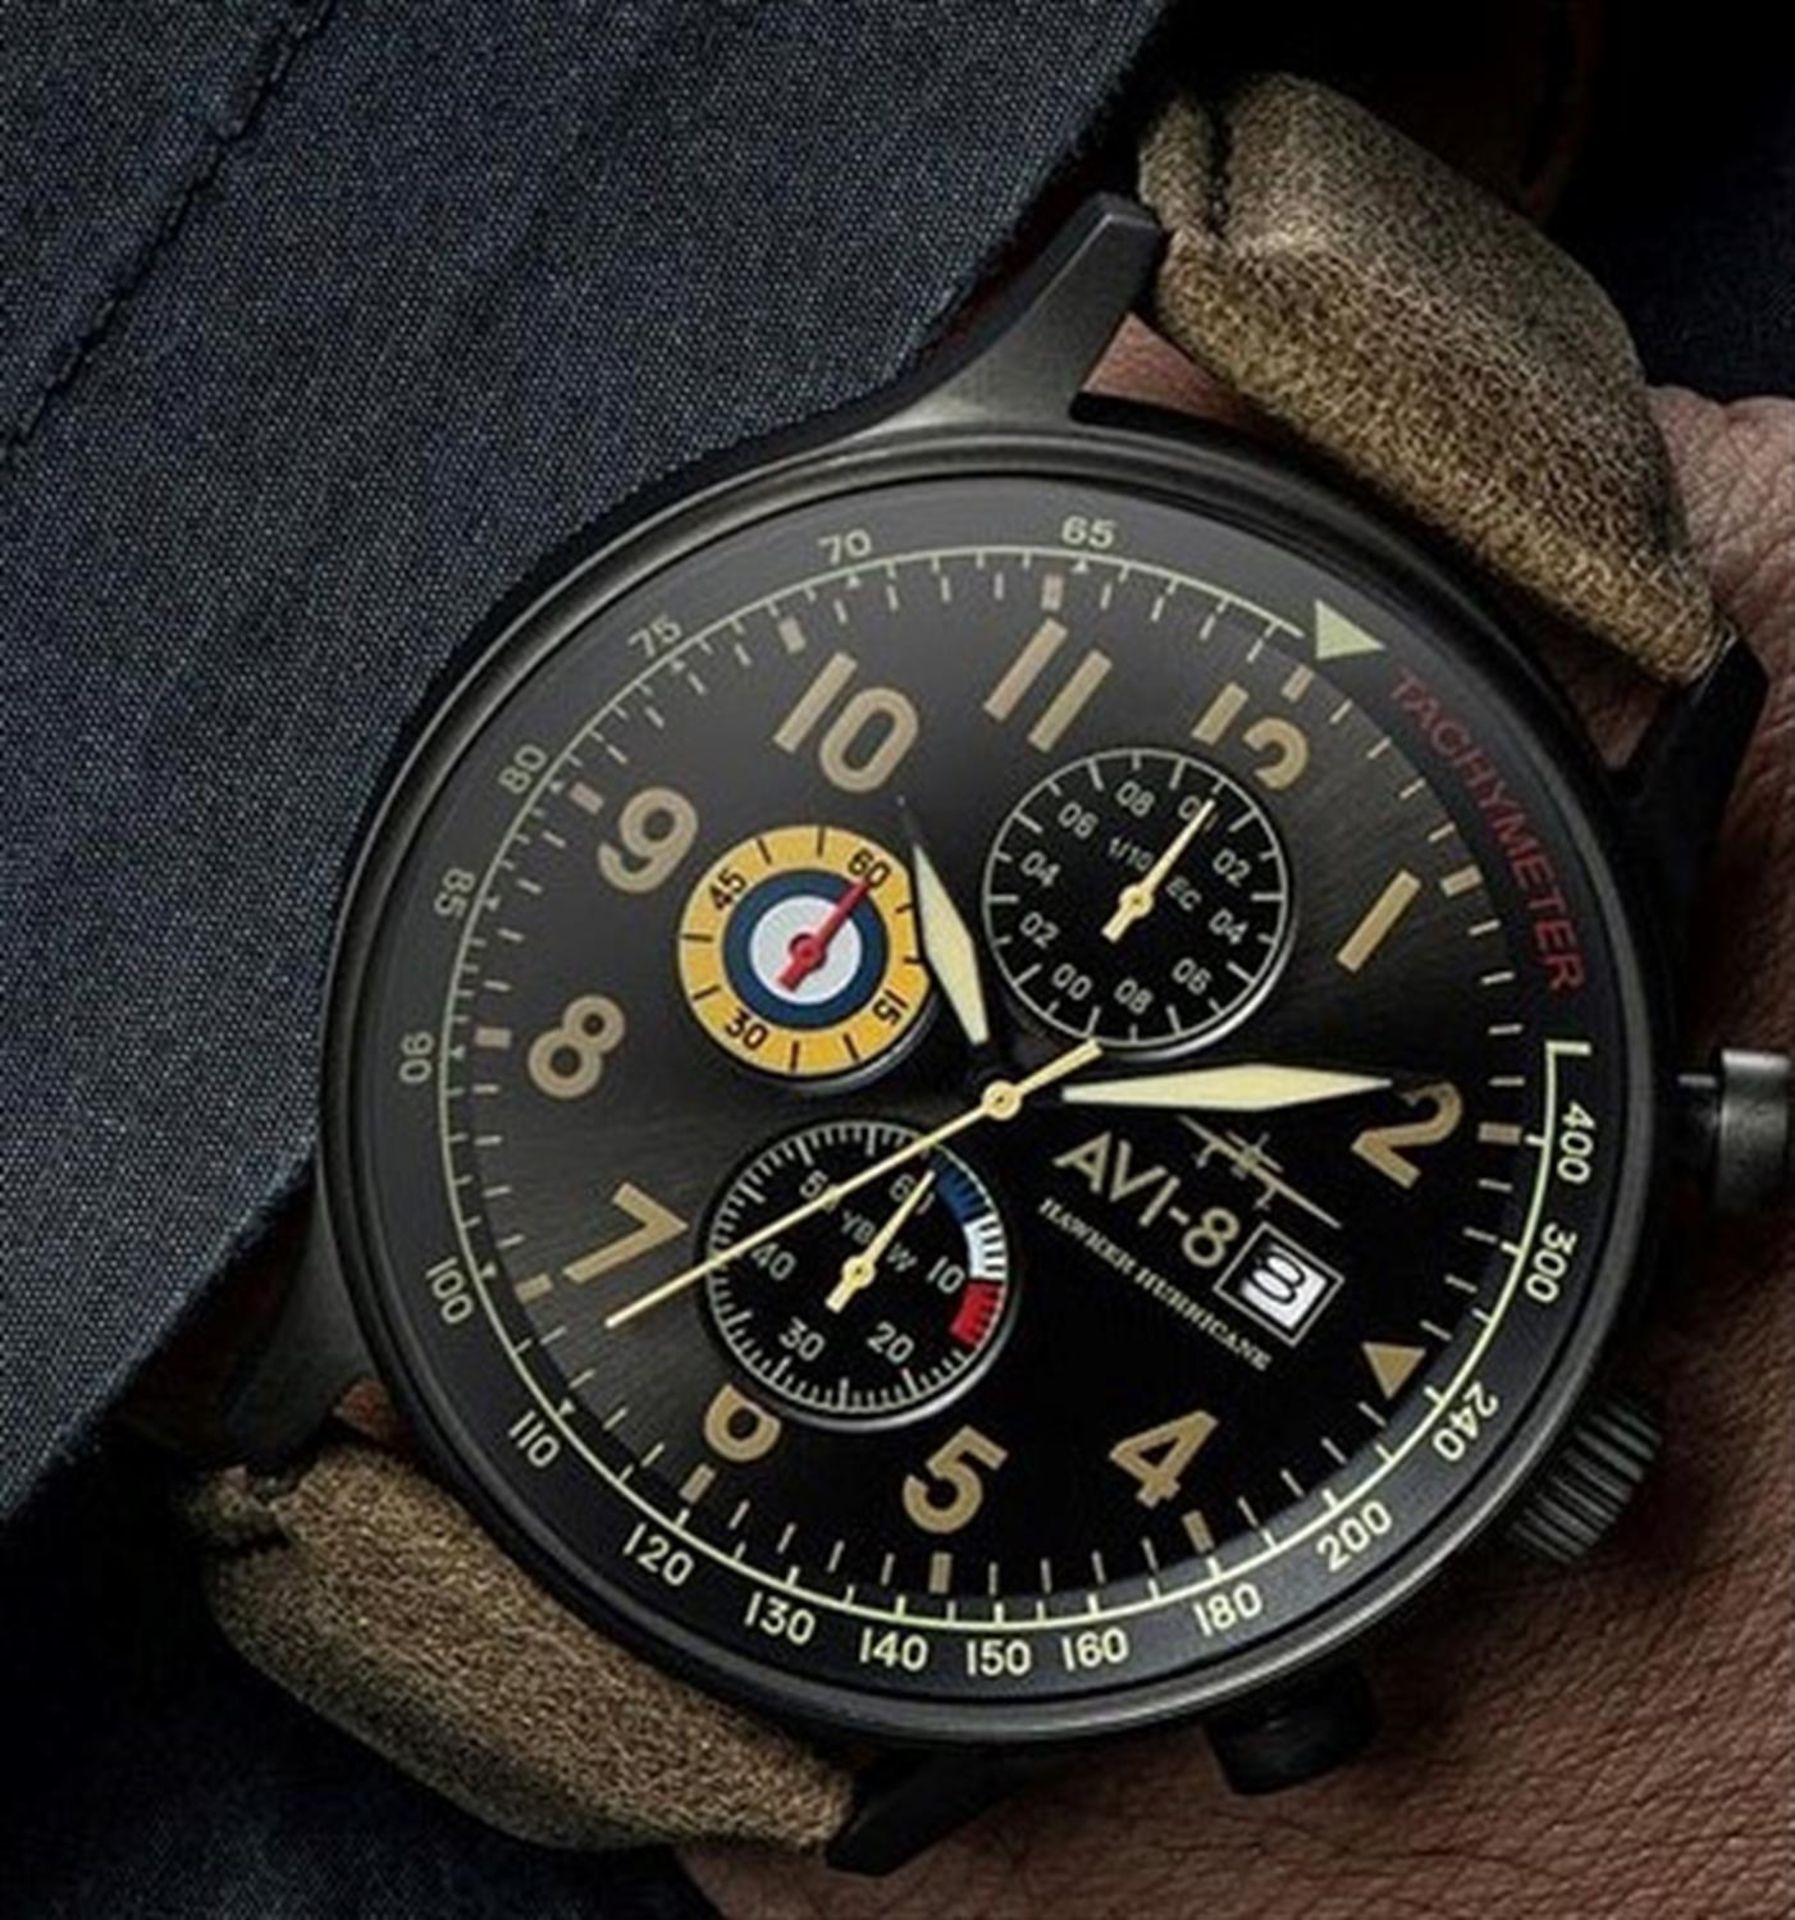 Classic Chronograph, an Homage to the Hawker Hurricane - Image 3 of 4